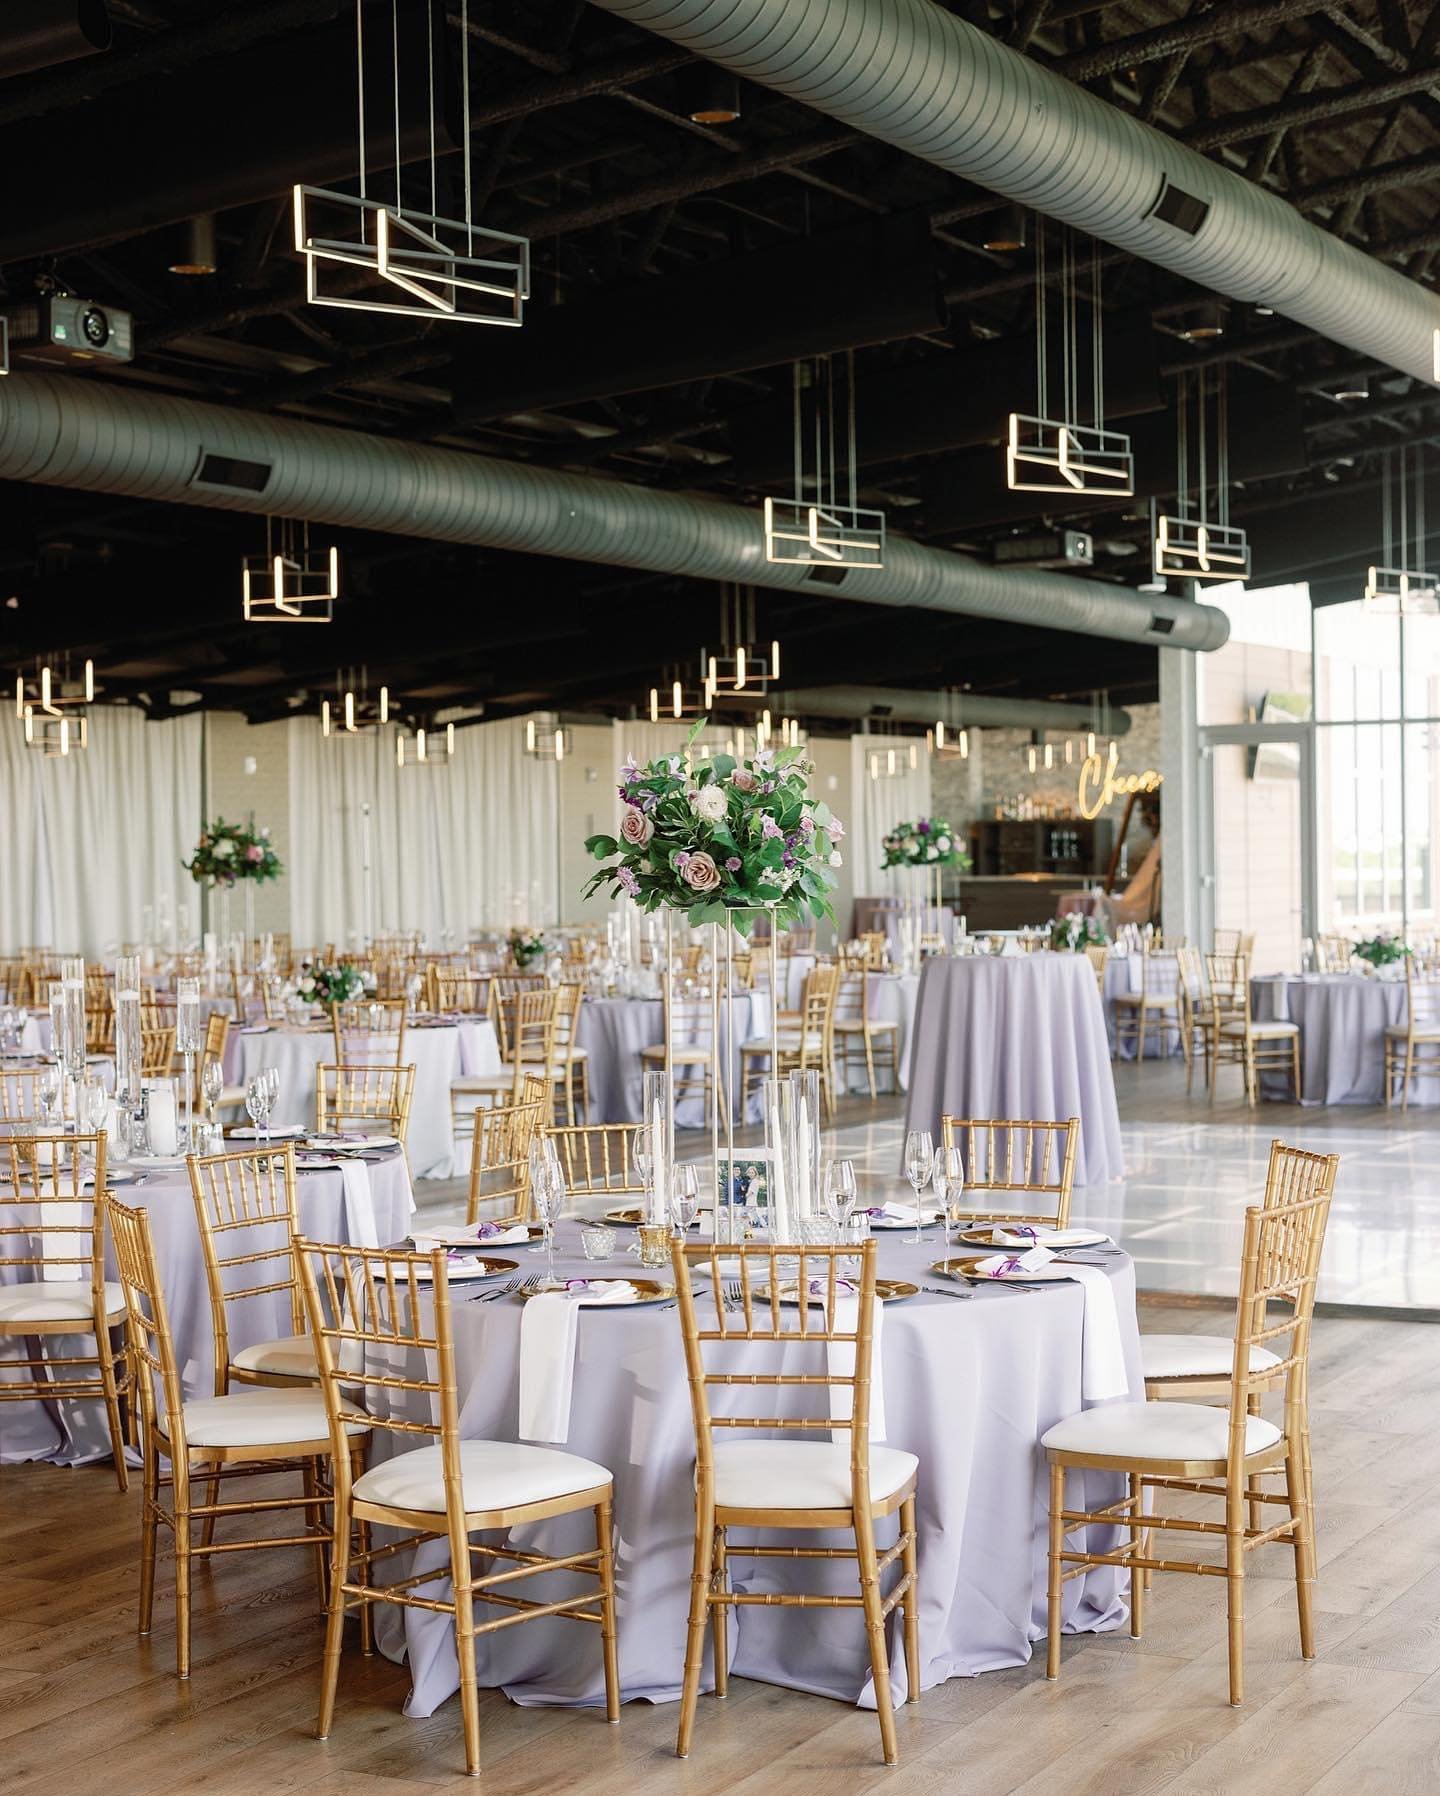 Taking you to new heights @theheightsrooftop!

Photo: @emilycrall 
Wedding planning: @soireeiowa